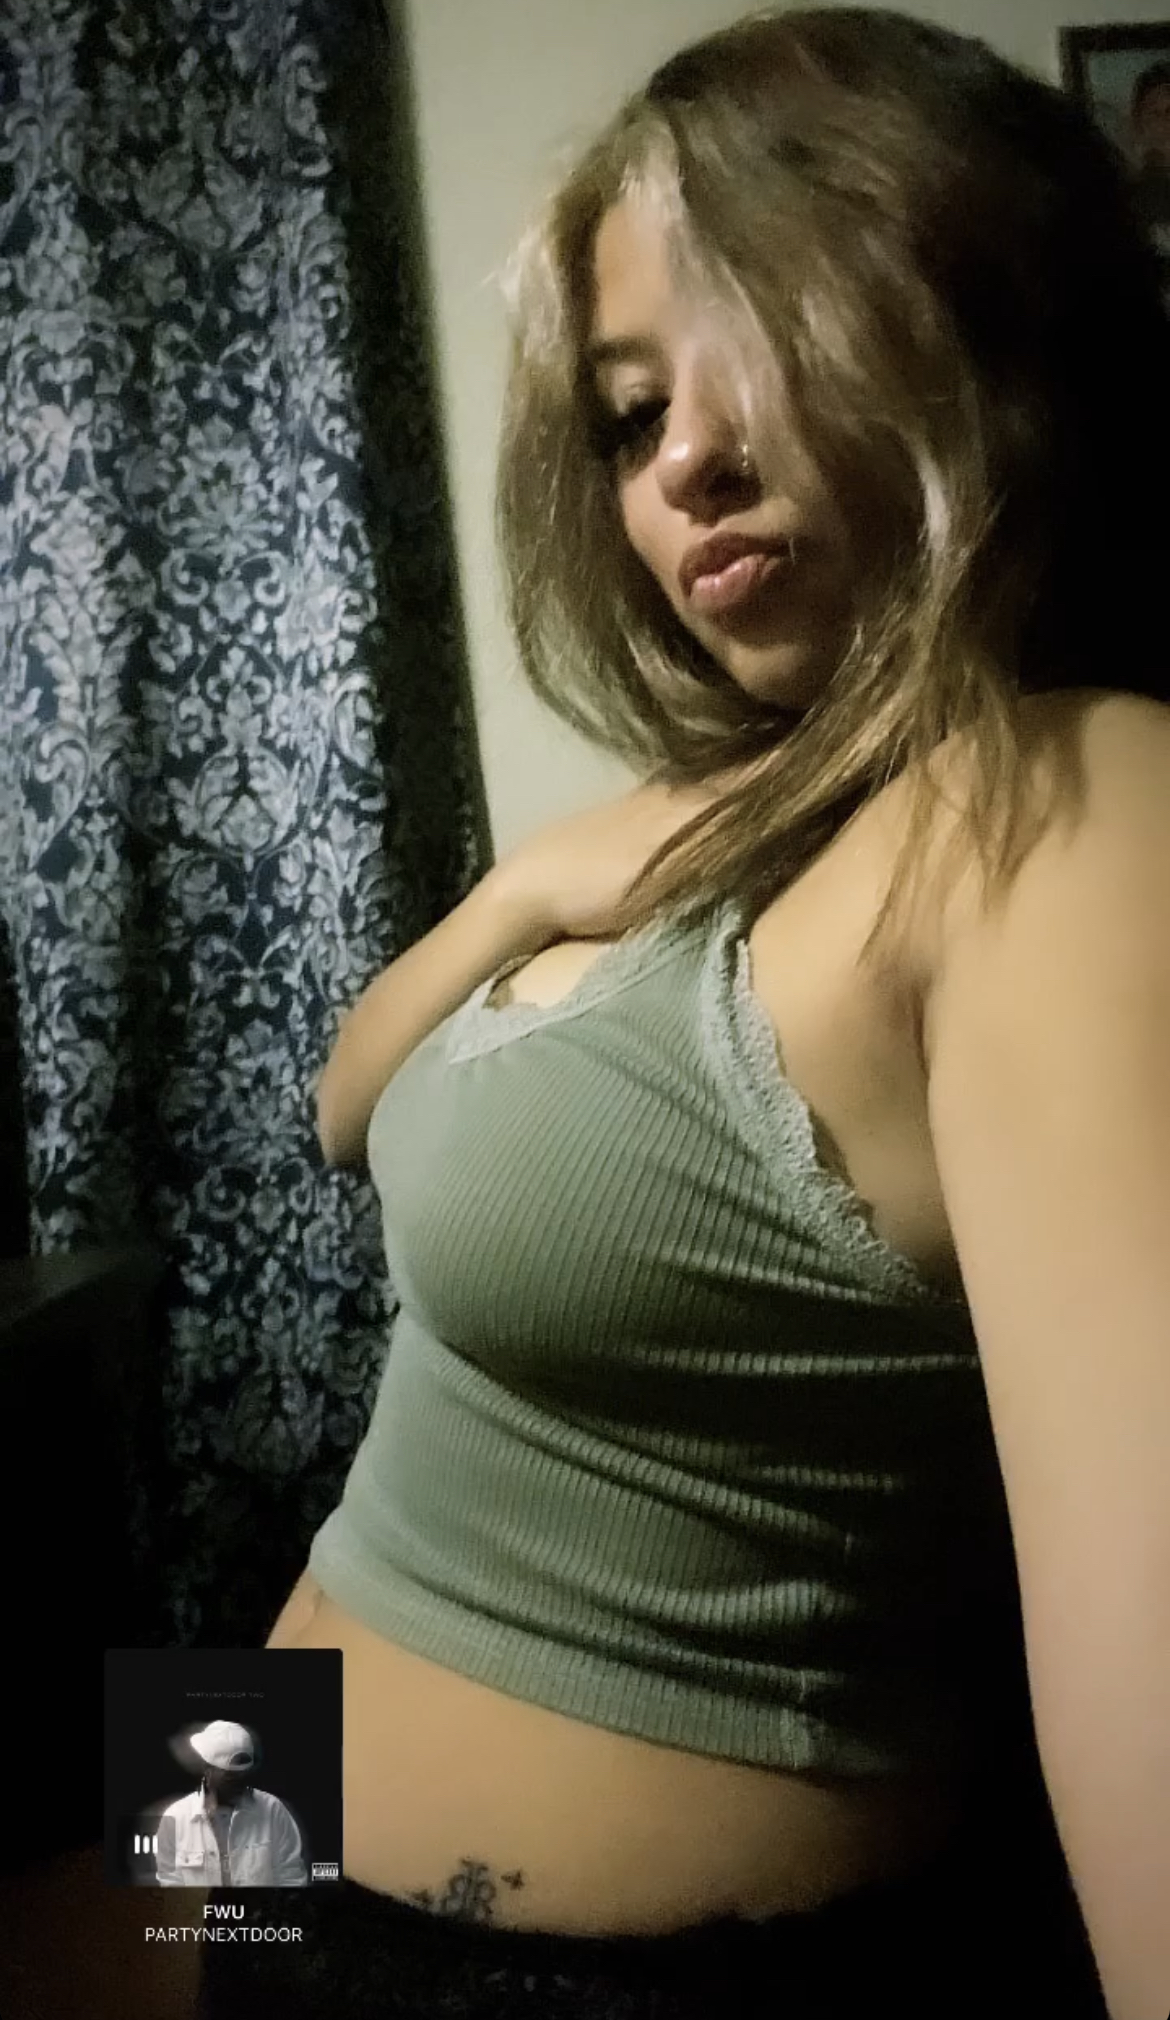  do anal, blowjob, oral and any other services you need me for